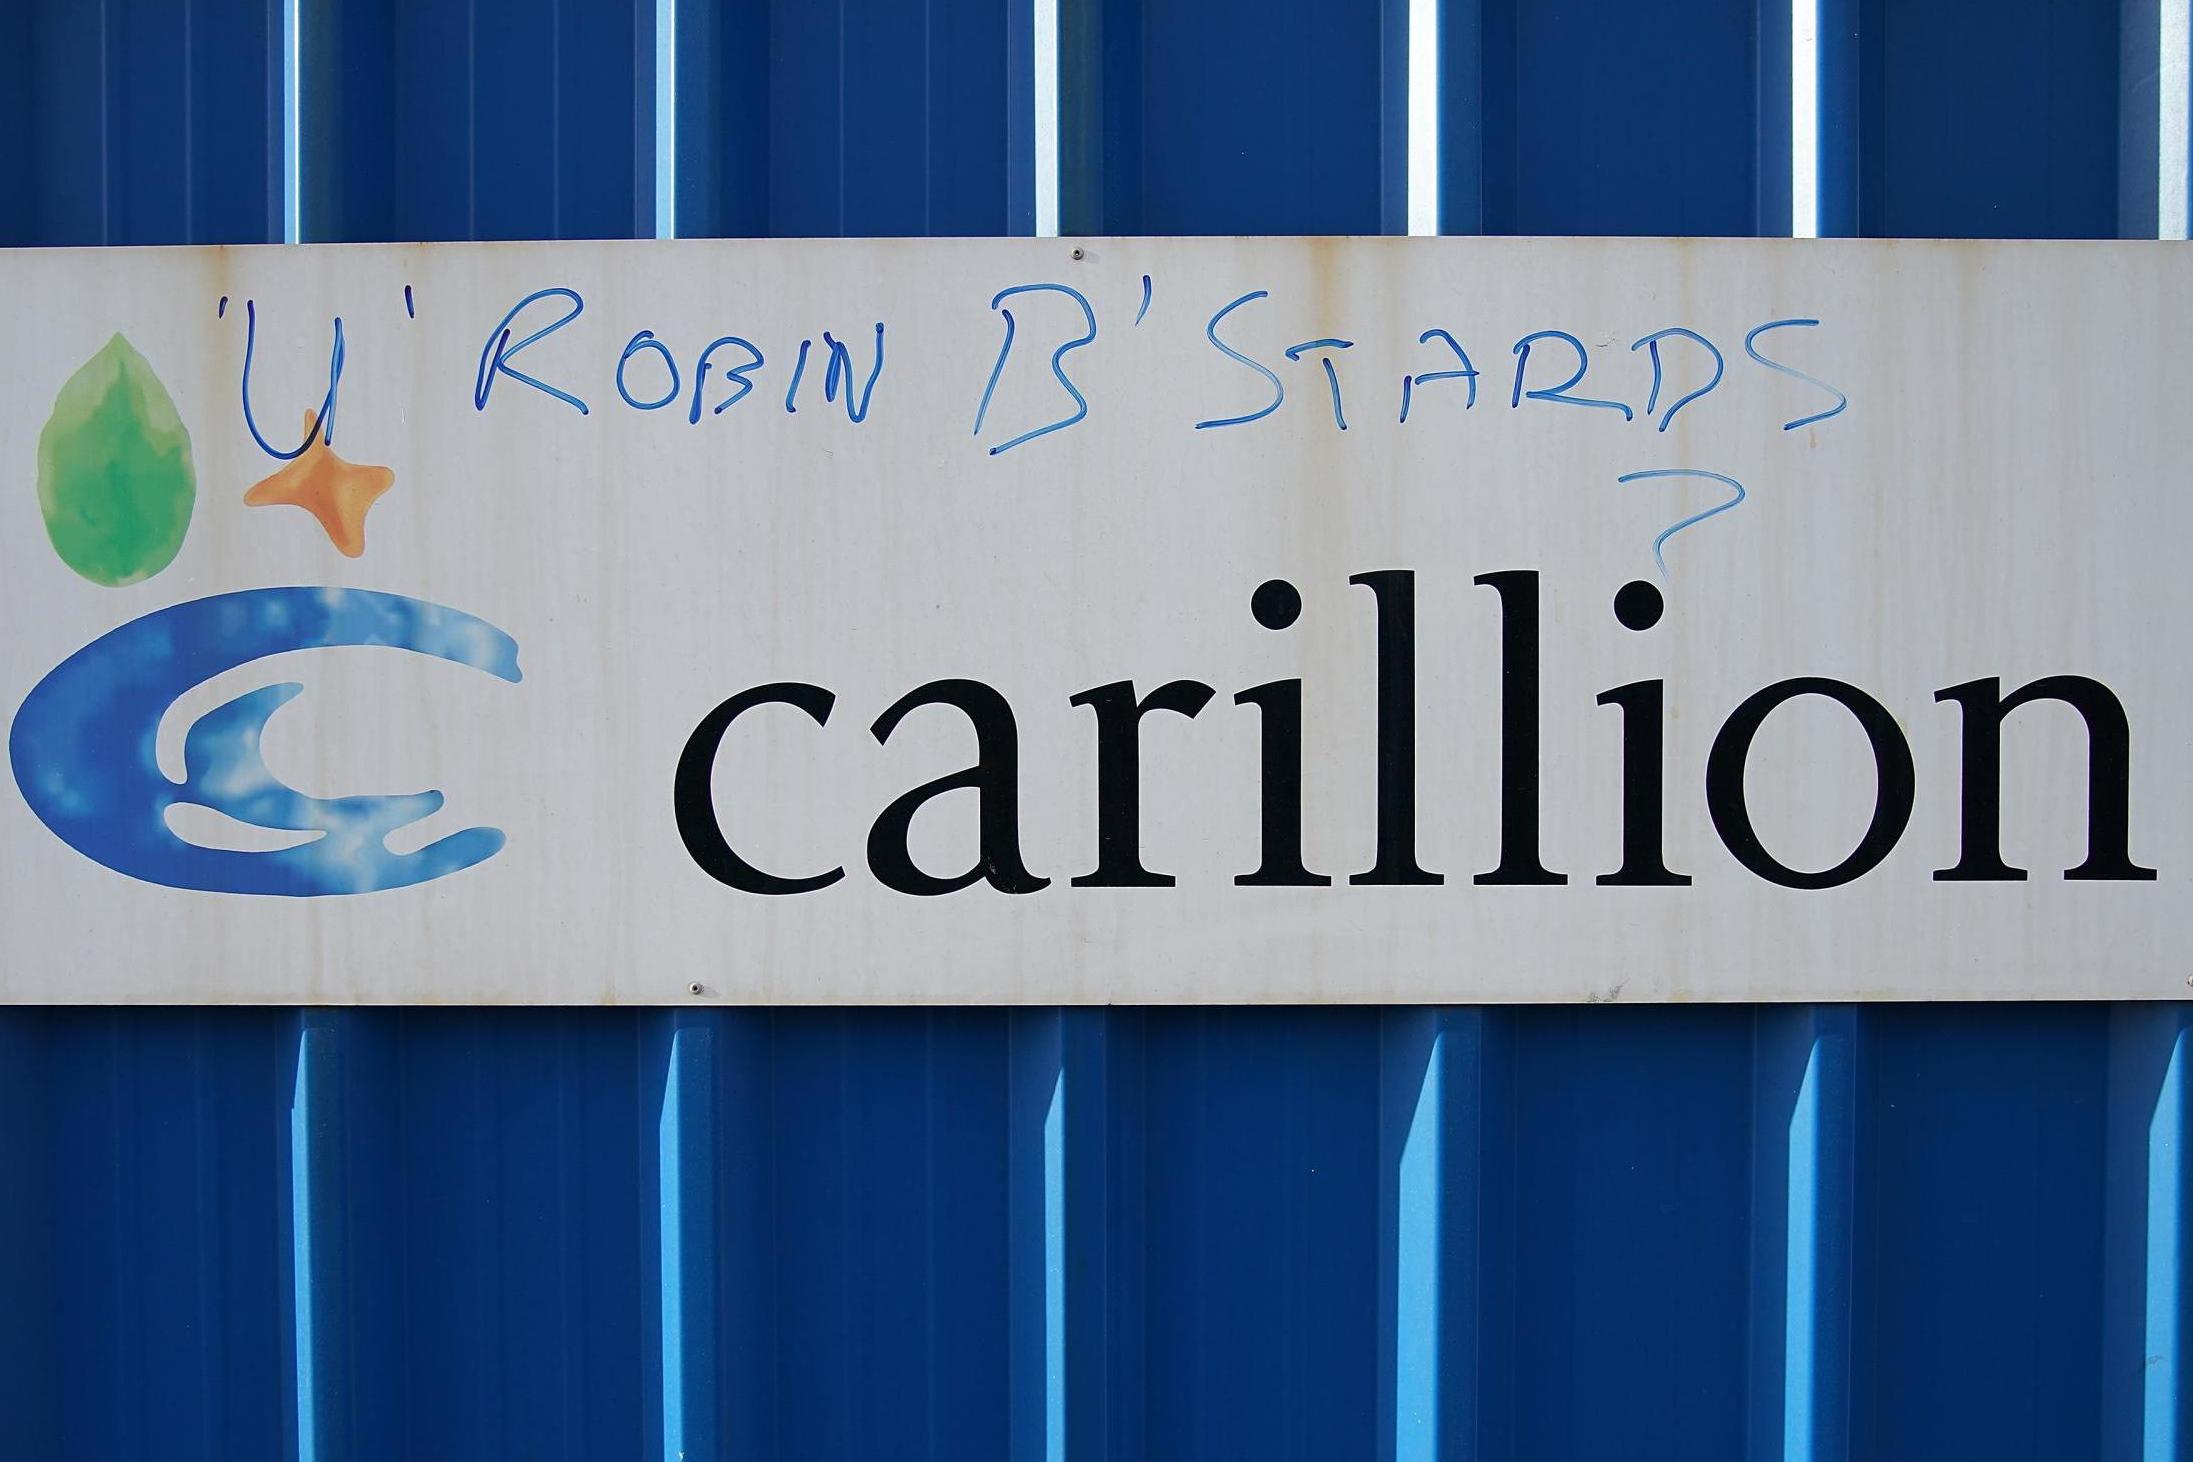 Carillion: The outsourcer's collapse is one of the scandals that have sparked calls for a shake up of auditors